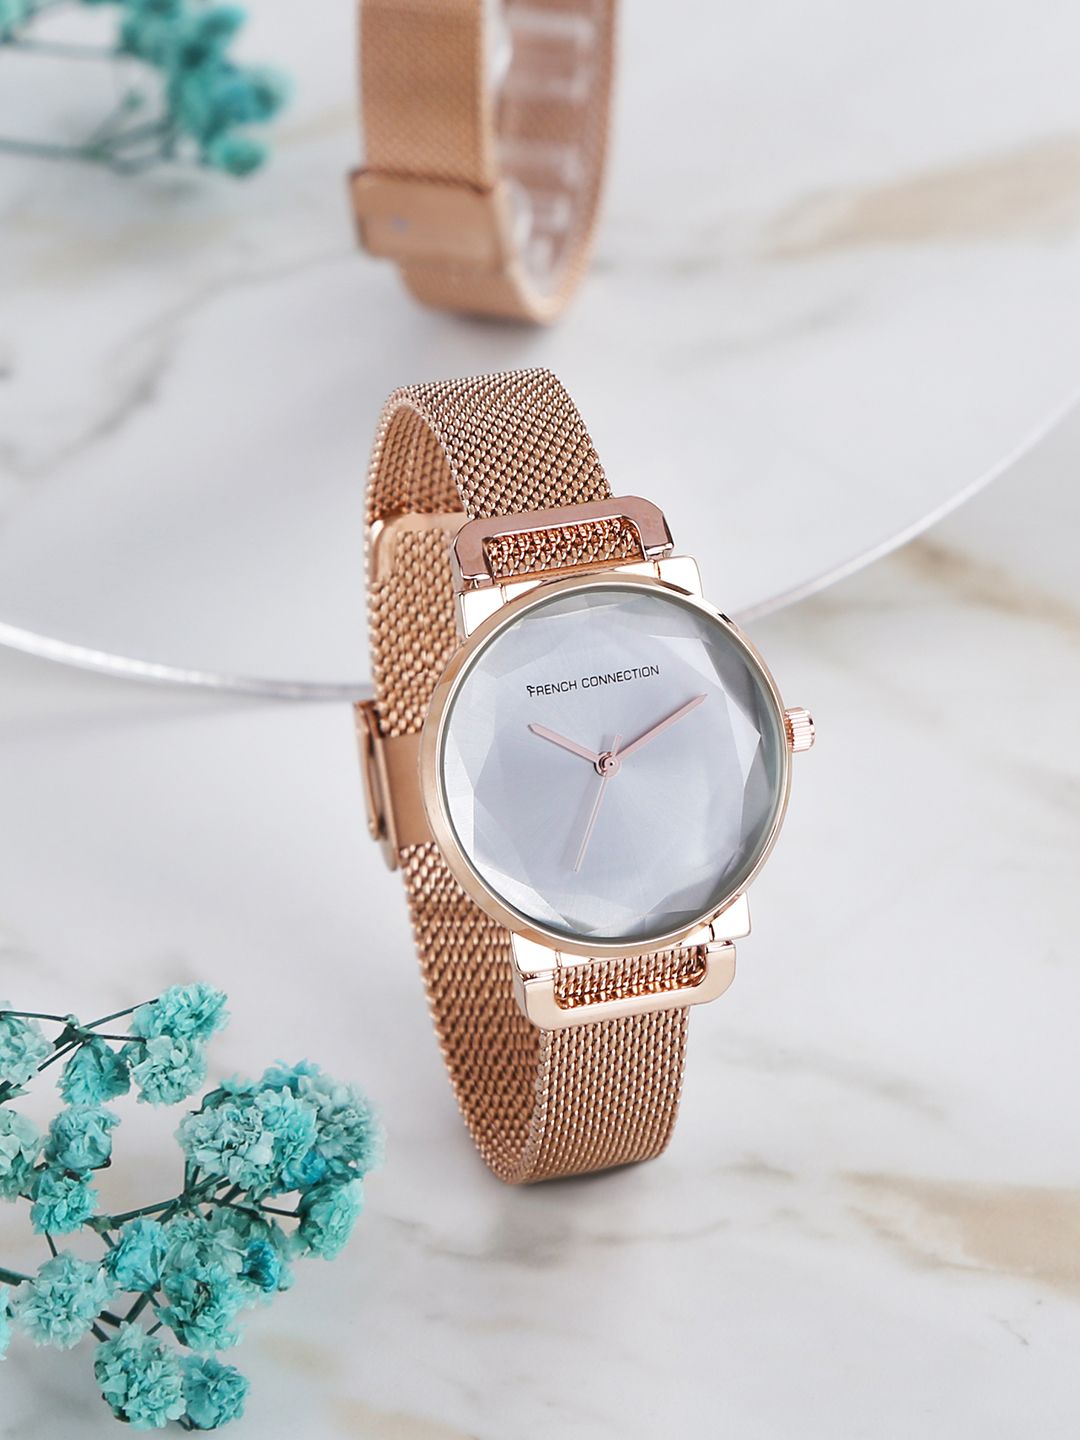 French Connection Women Silver-Toned Analogue Watch Price in India